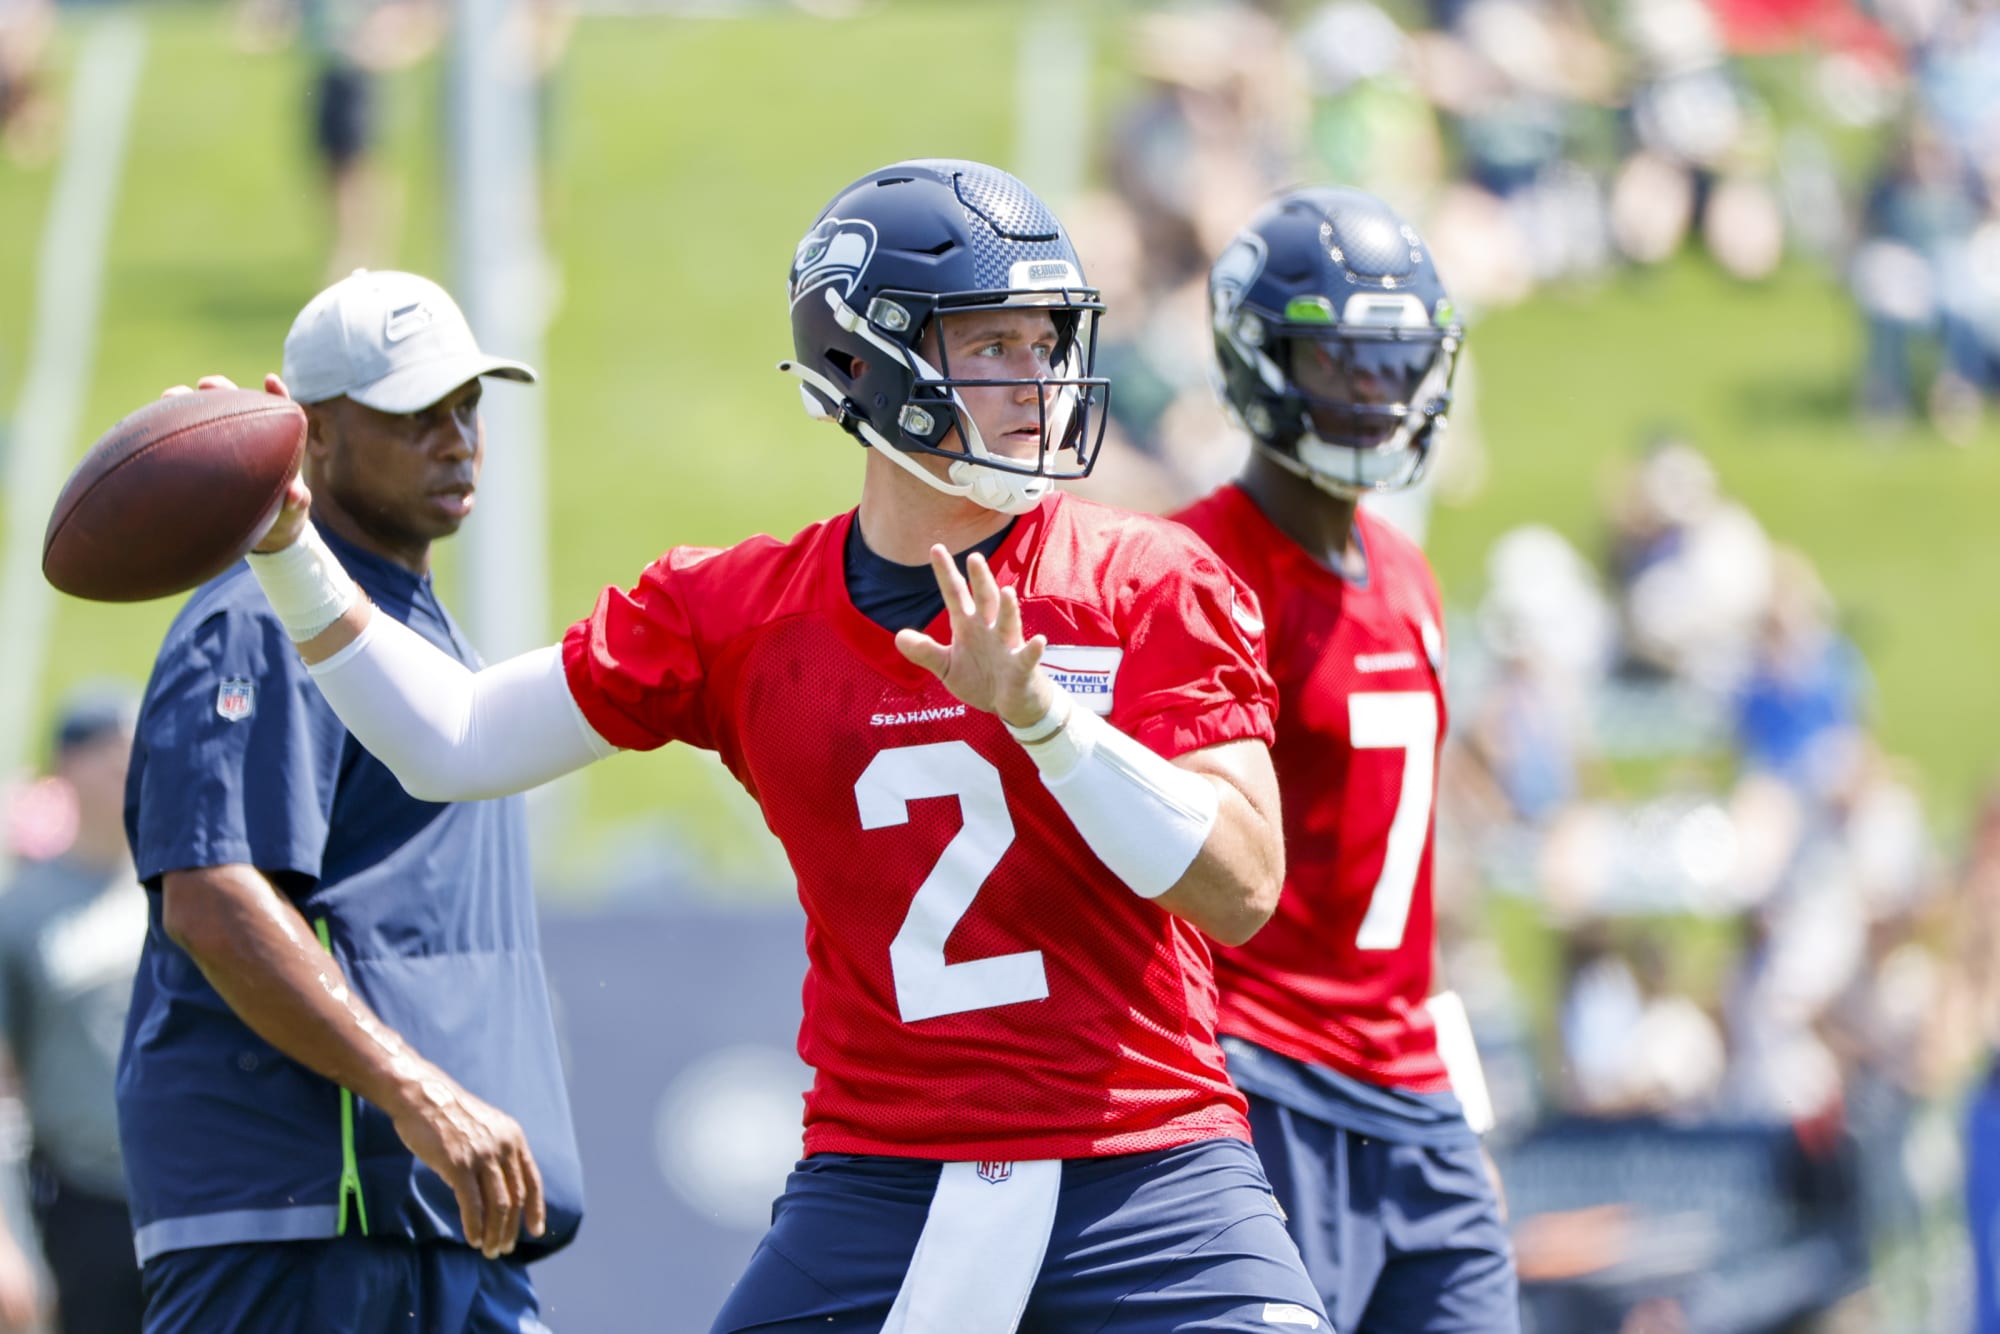 3 quick takeaways from Seahawks mock game on Saturday